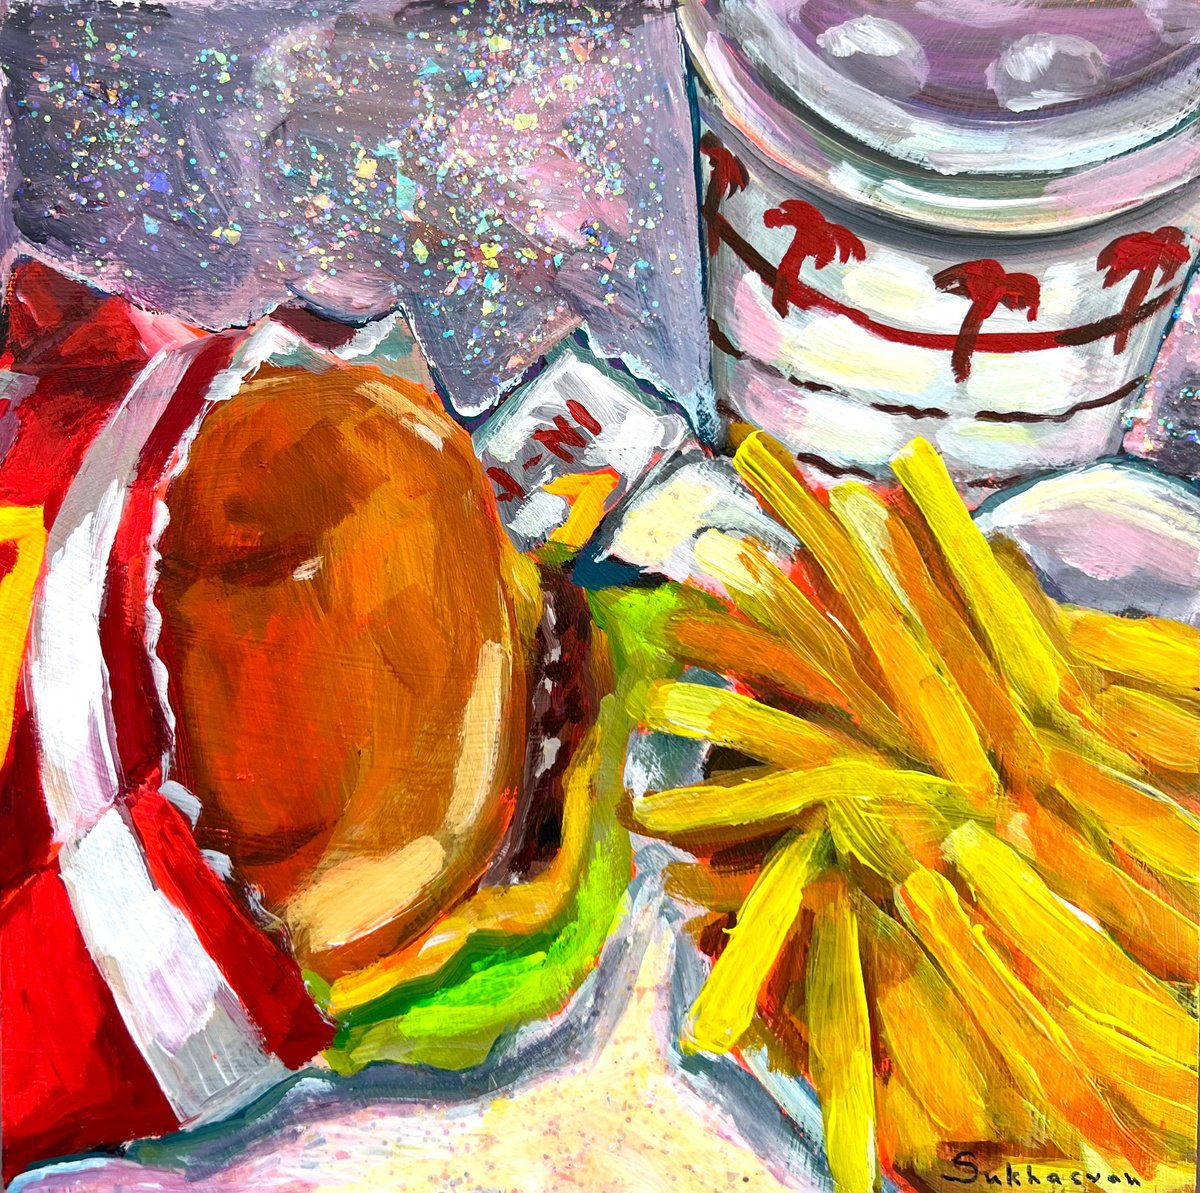 Still Life with In-N-Out Burger and Fries by Victoria Sukhasyan